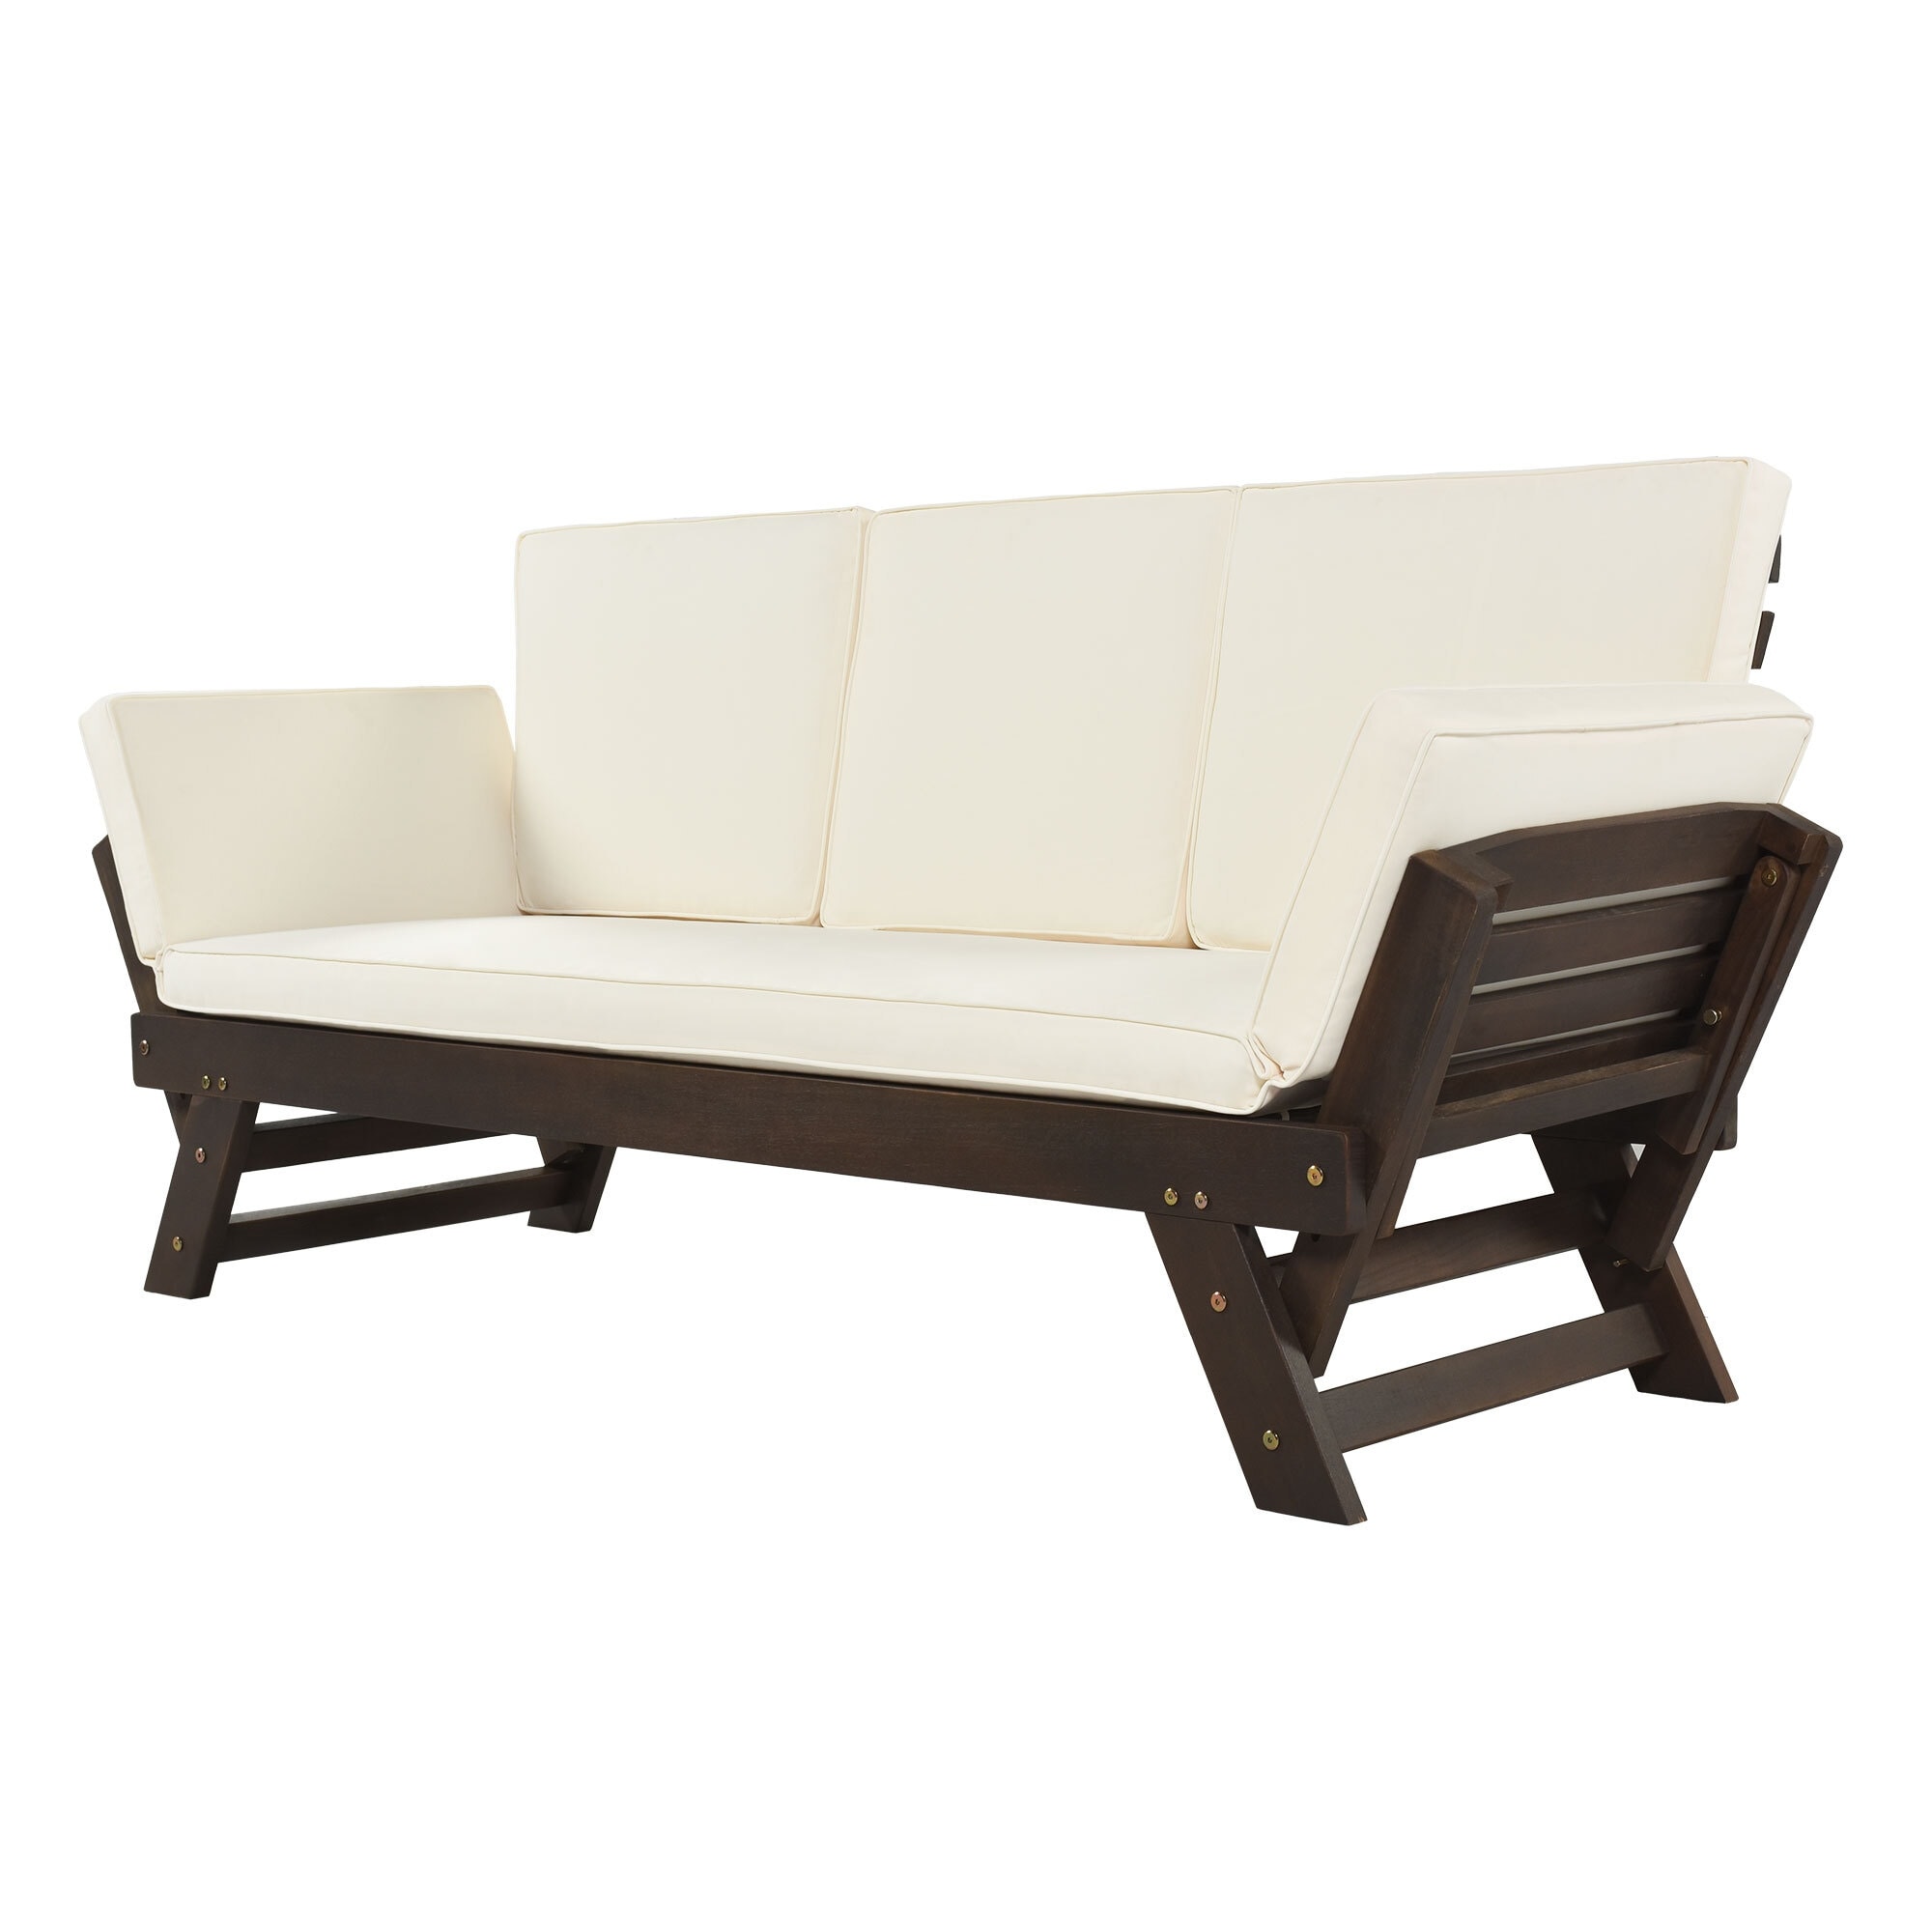 Williamspace Convertible Patio Sofa  Outdoor Daybed With Pillows